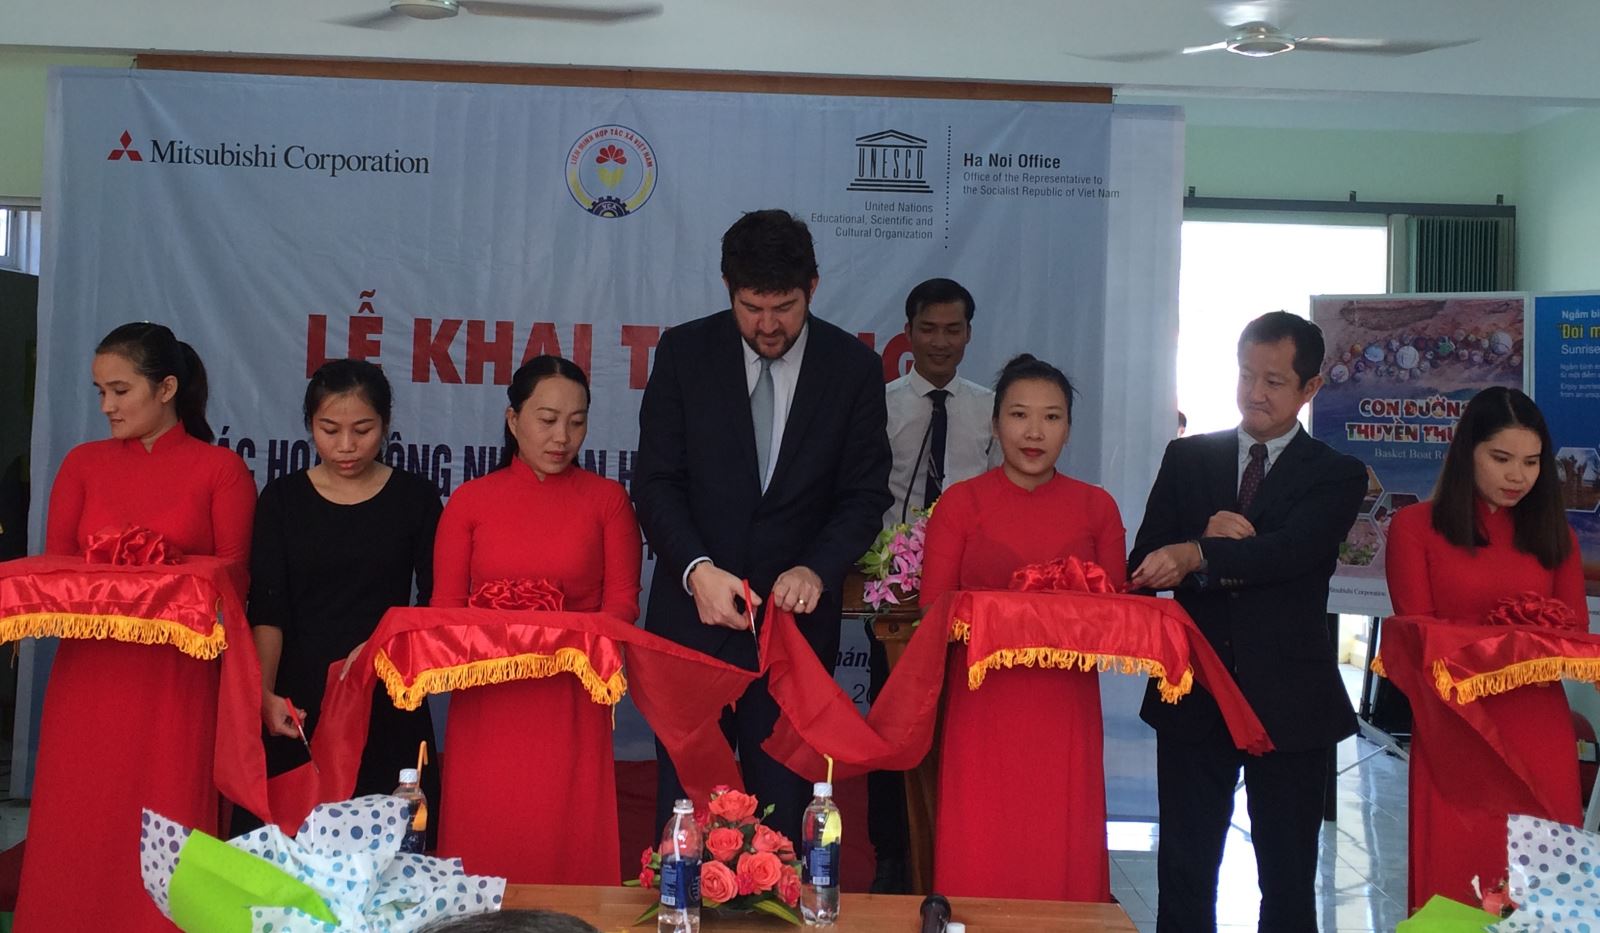 Cultural House funded by Mitsubishi via UNESCO launched in Quang Nam